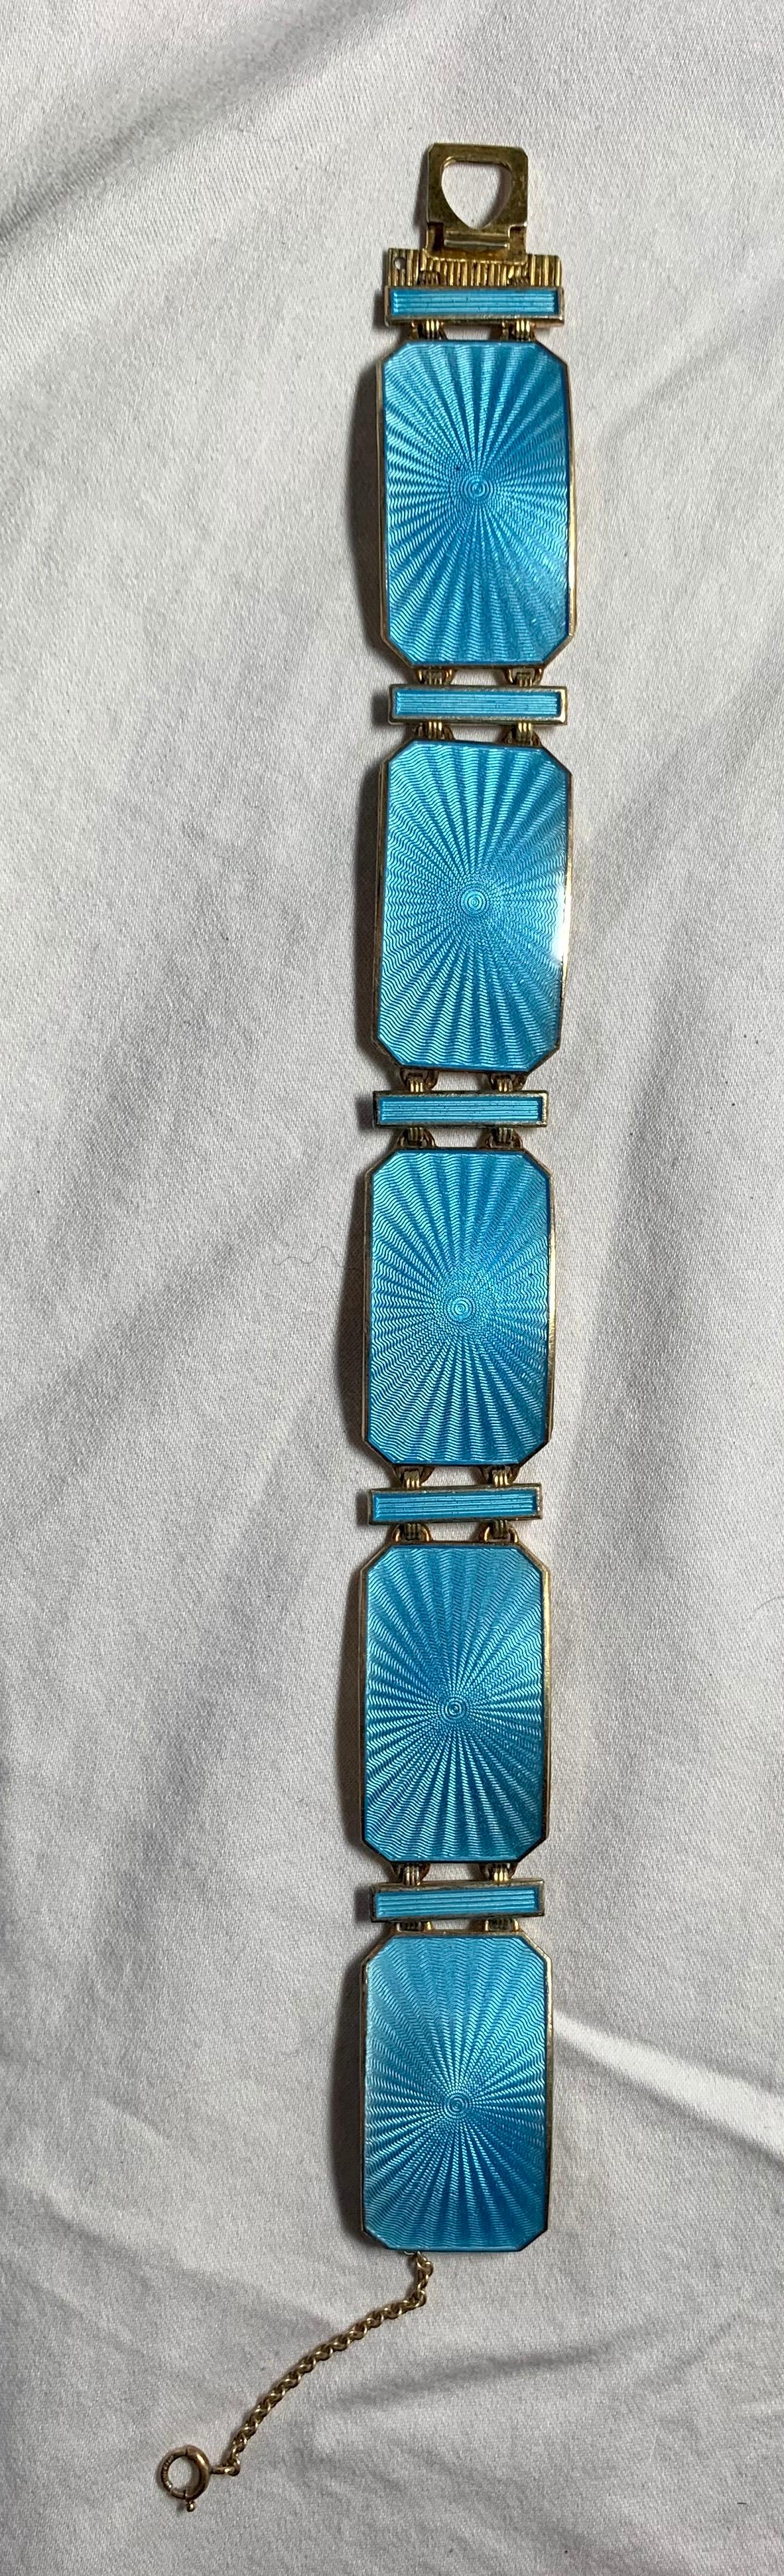 This is an exquisite Robin's Egg Blue Guilloche Enamel Mid-Century Modern Eames Era period Bracelet by the esteemed Norwegian Silversmith Albert Scharning in an incredible blue enamel design.  This bracelet is one of the most beautiful Scandinavian